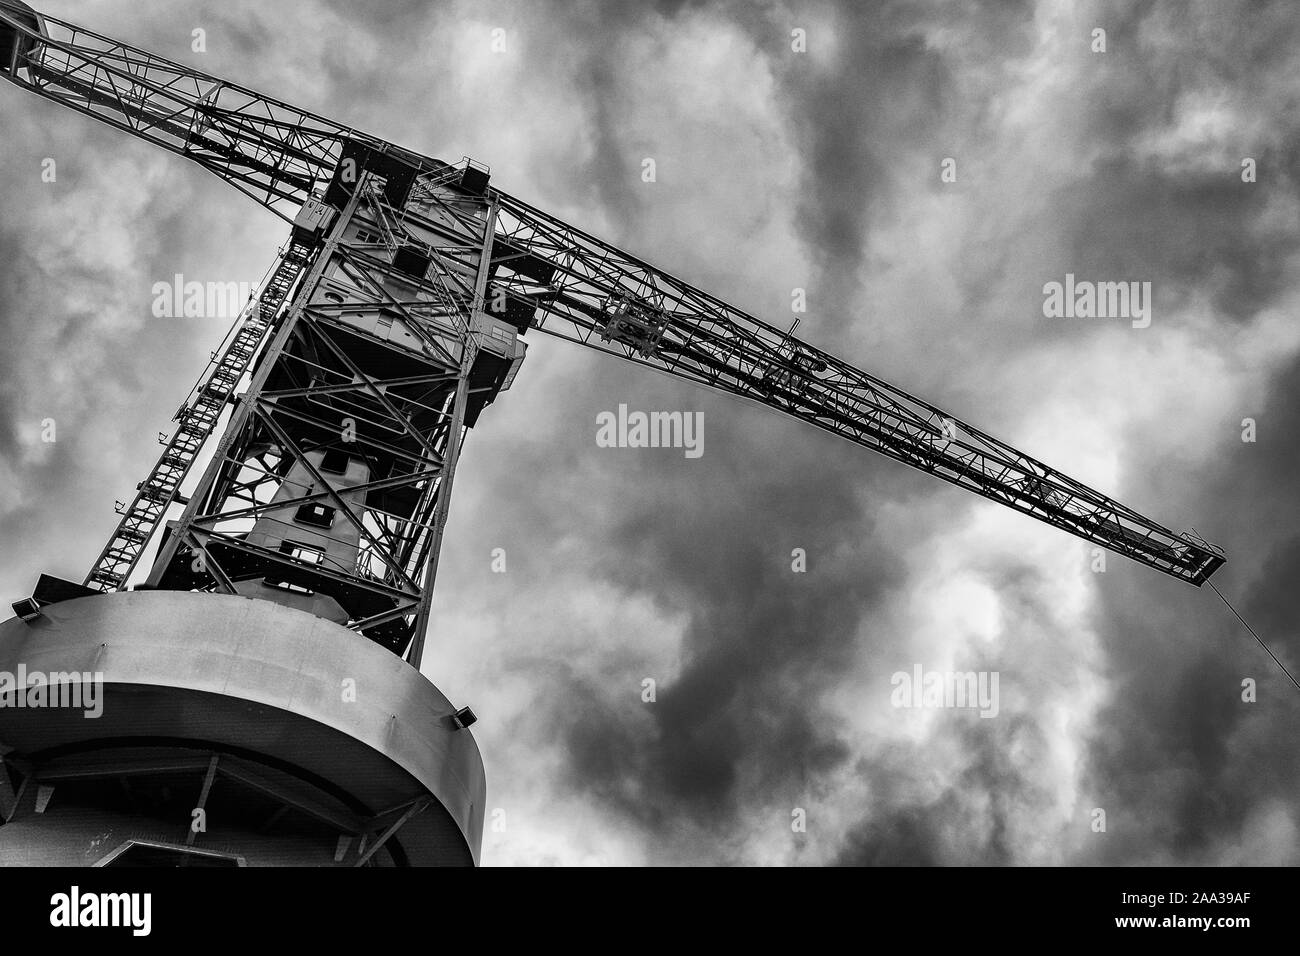 NDSM Crane, old crane, dark clouds, dramatic sky, Black and white picture, postcard, abstract background, wallpaper, old industry, Amsterdam Noord Stock Photo